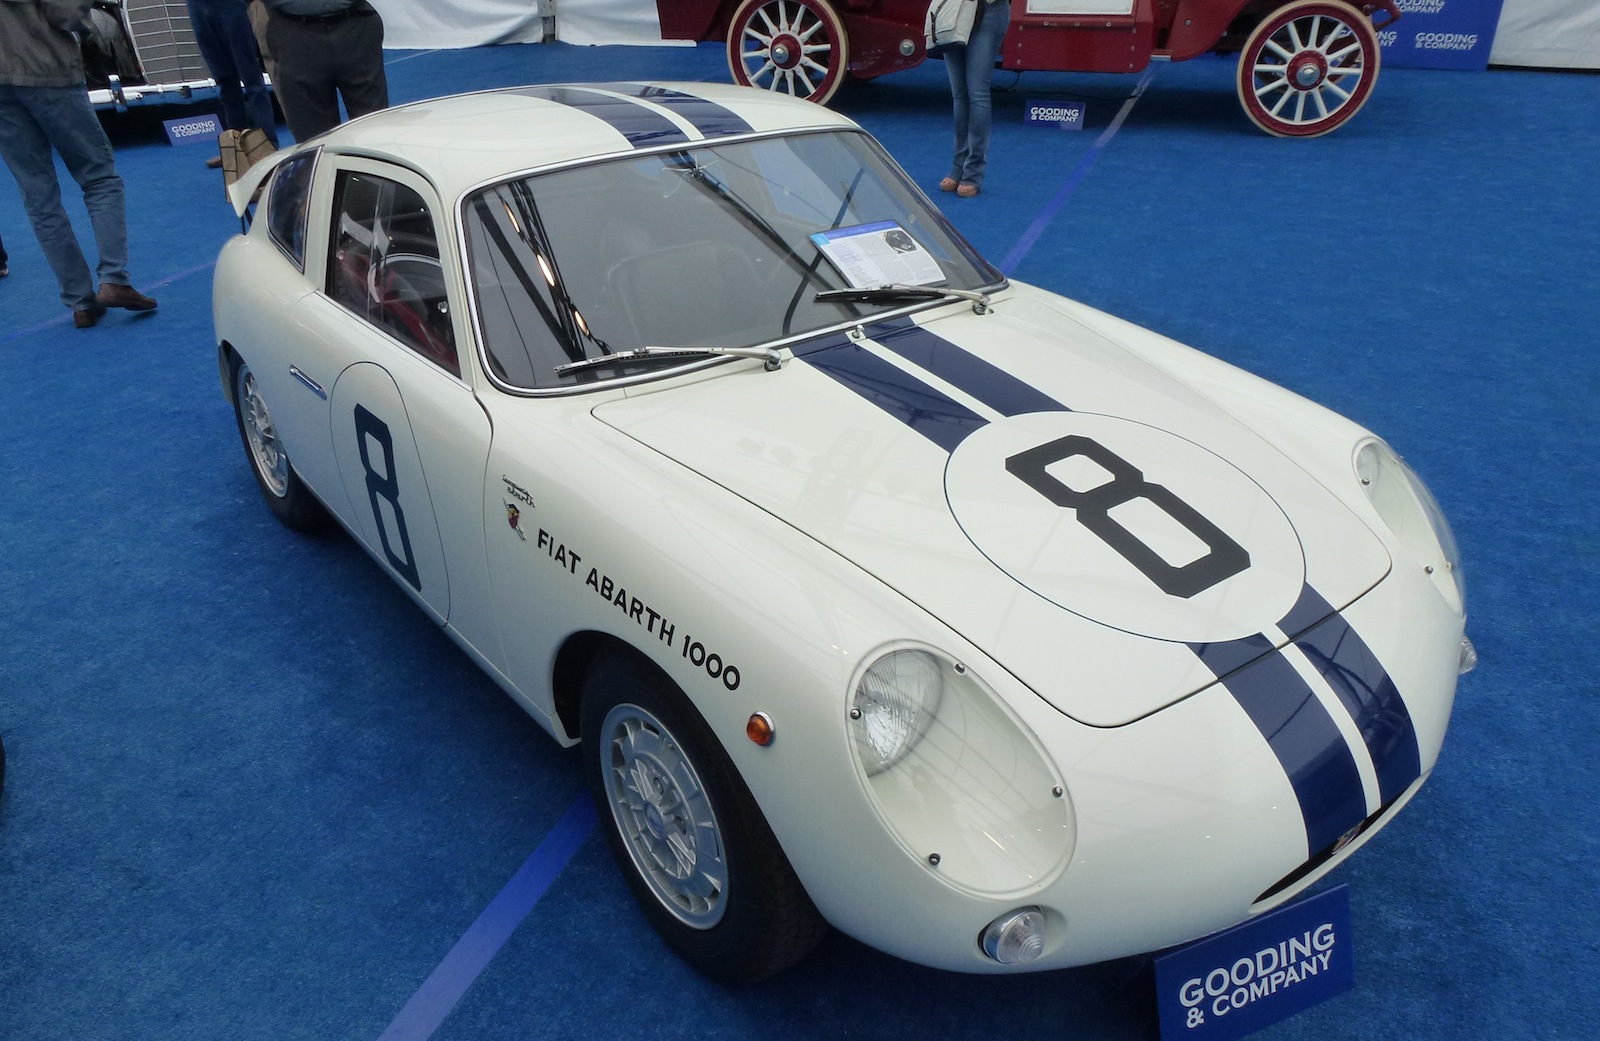 Raced By Bruce McLaren and Owned By Briggs Cunningham - A Fiat-Abarth 1000 GT